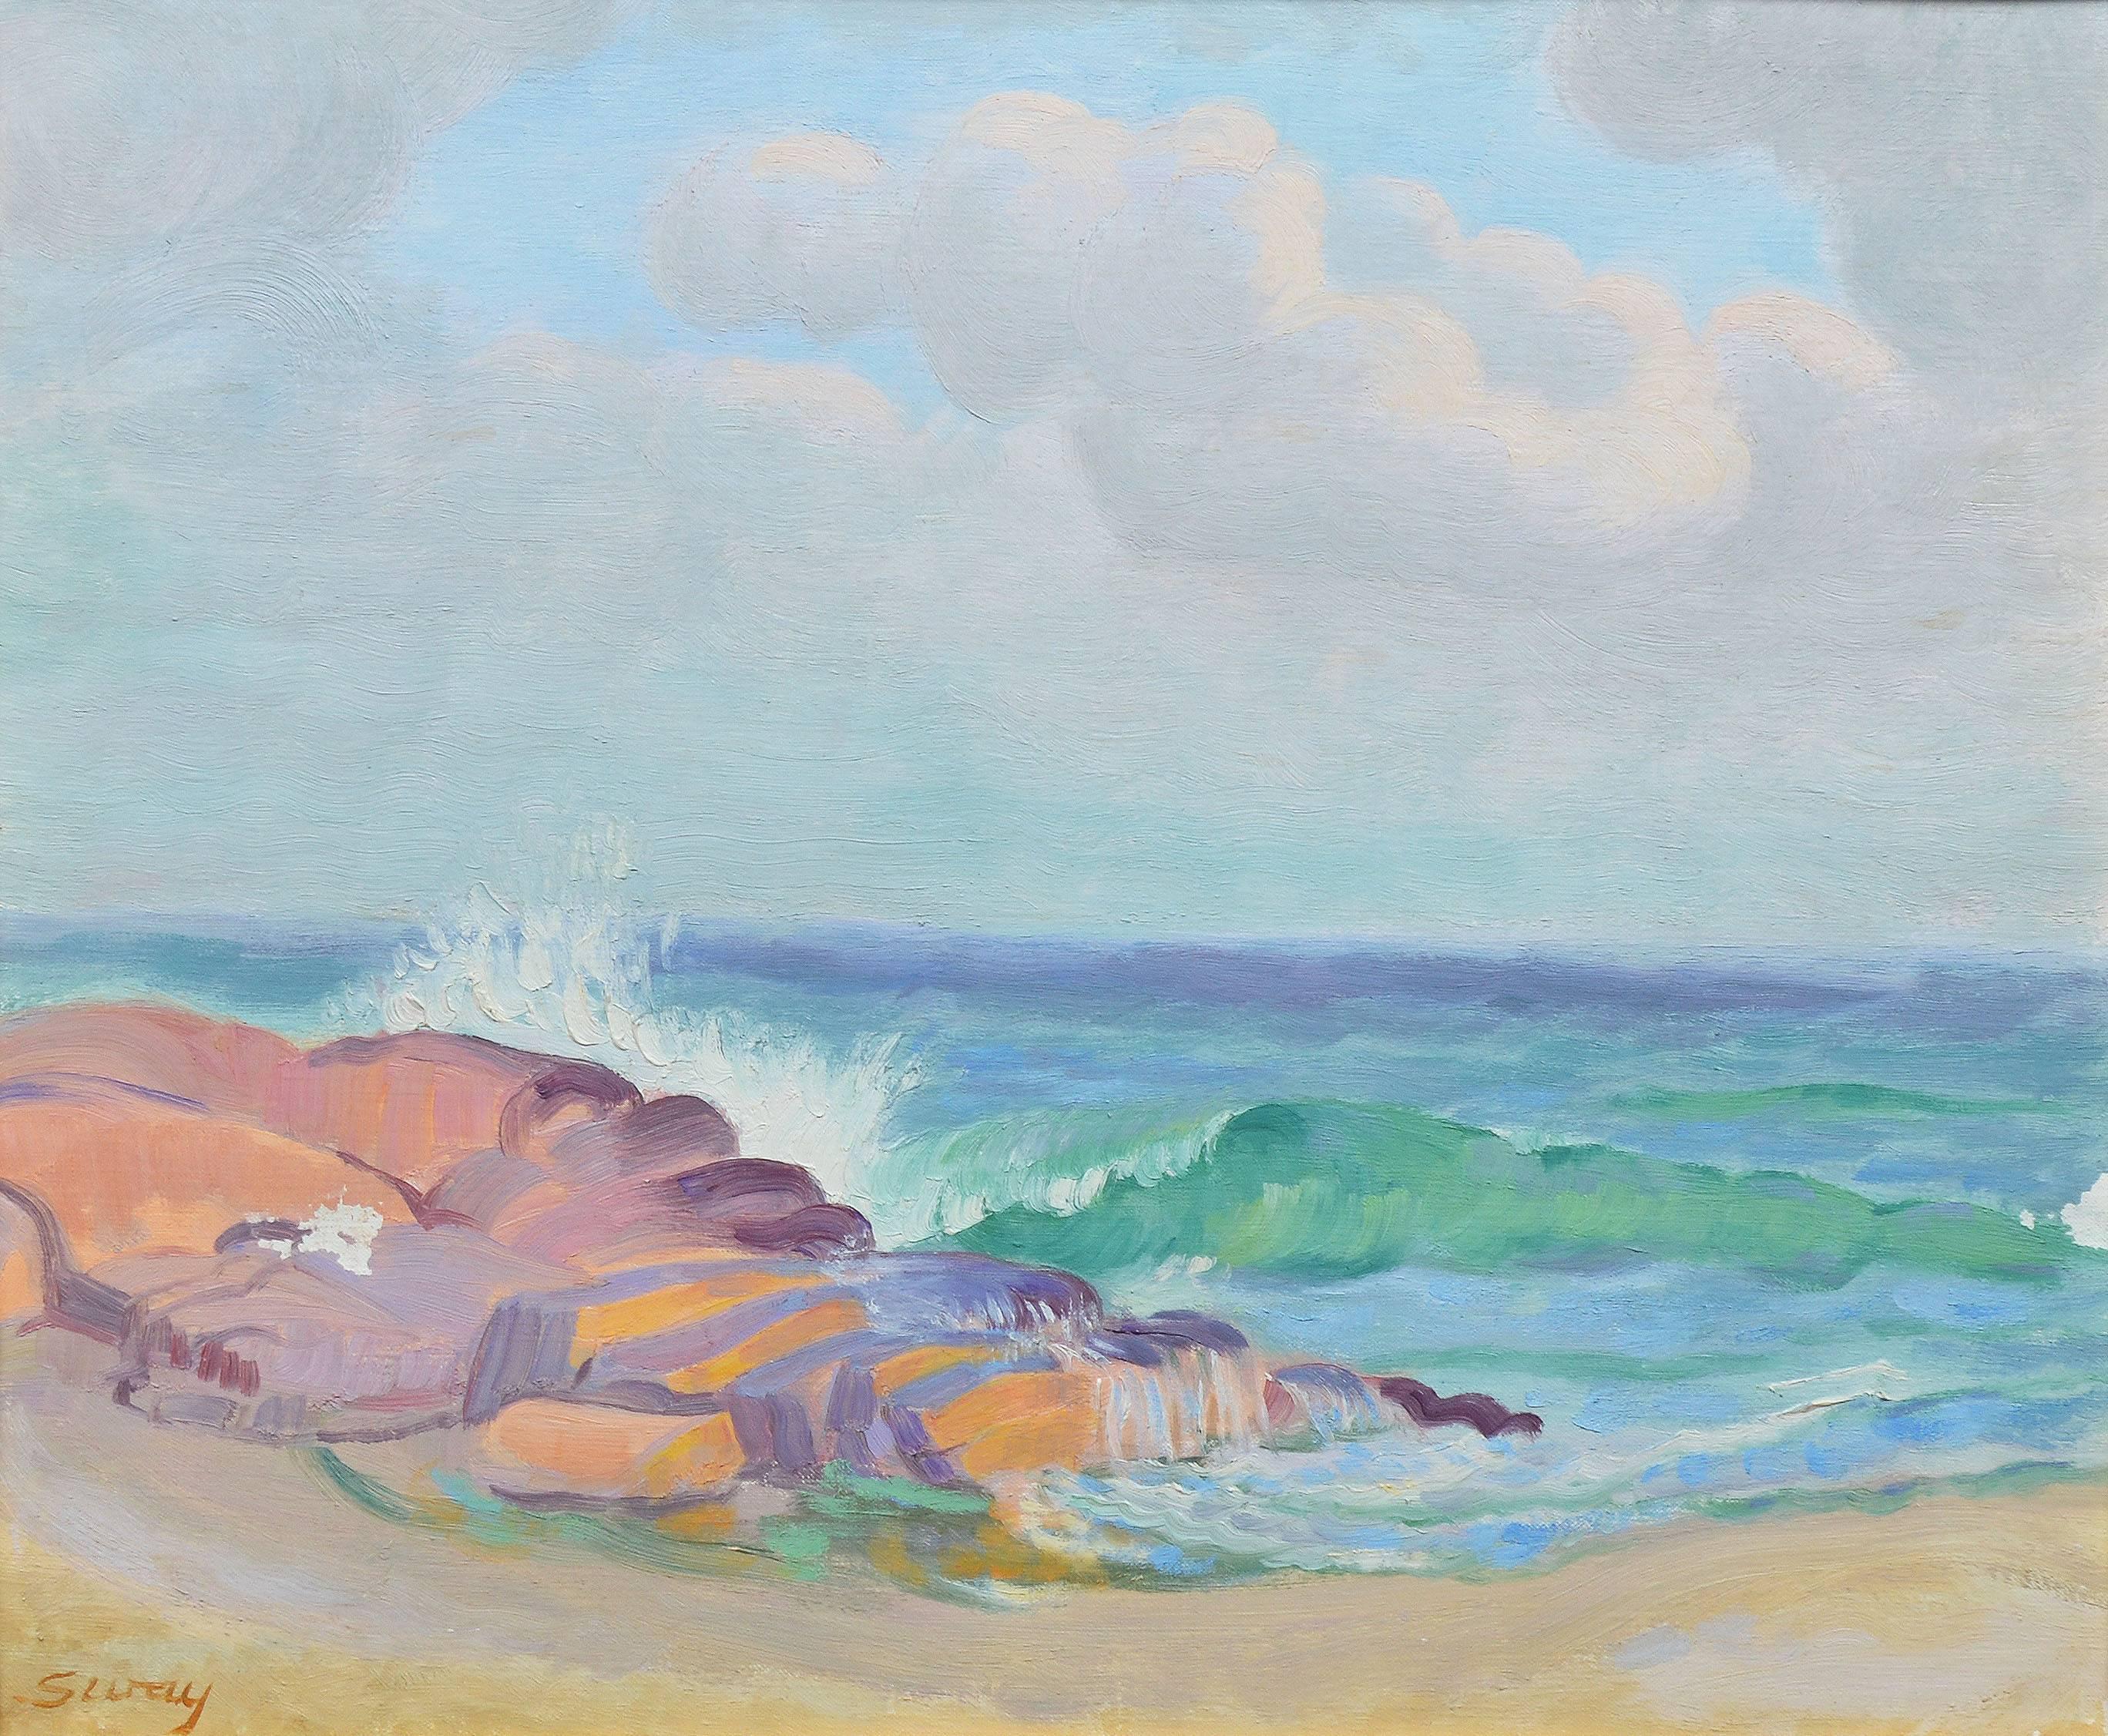 View of a Beach, by Albert Sway 1